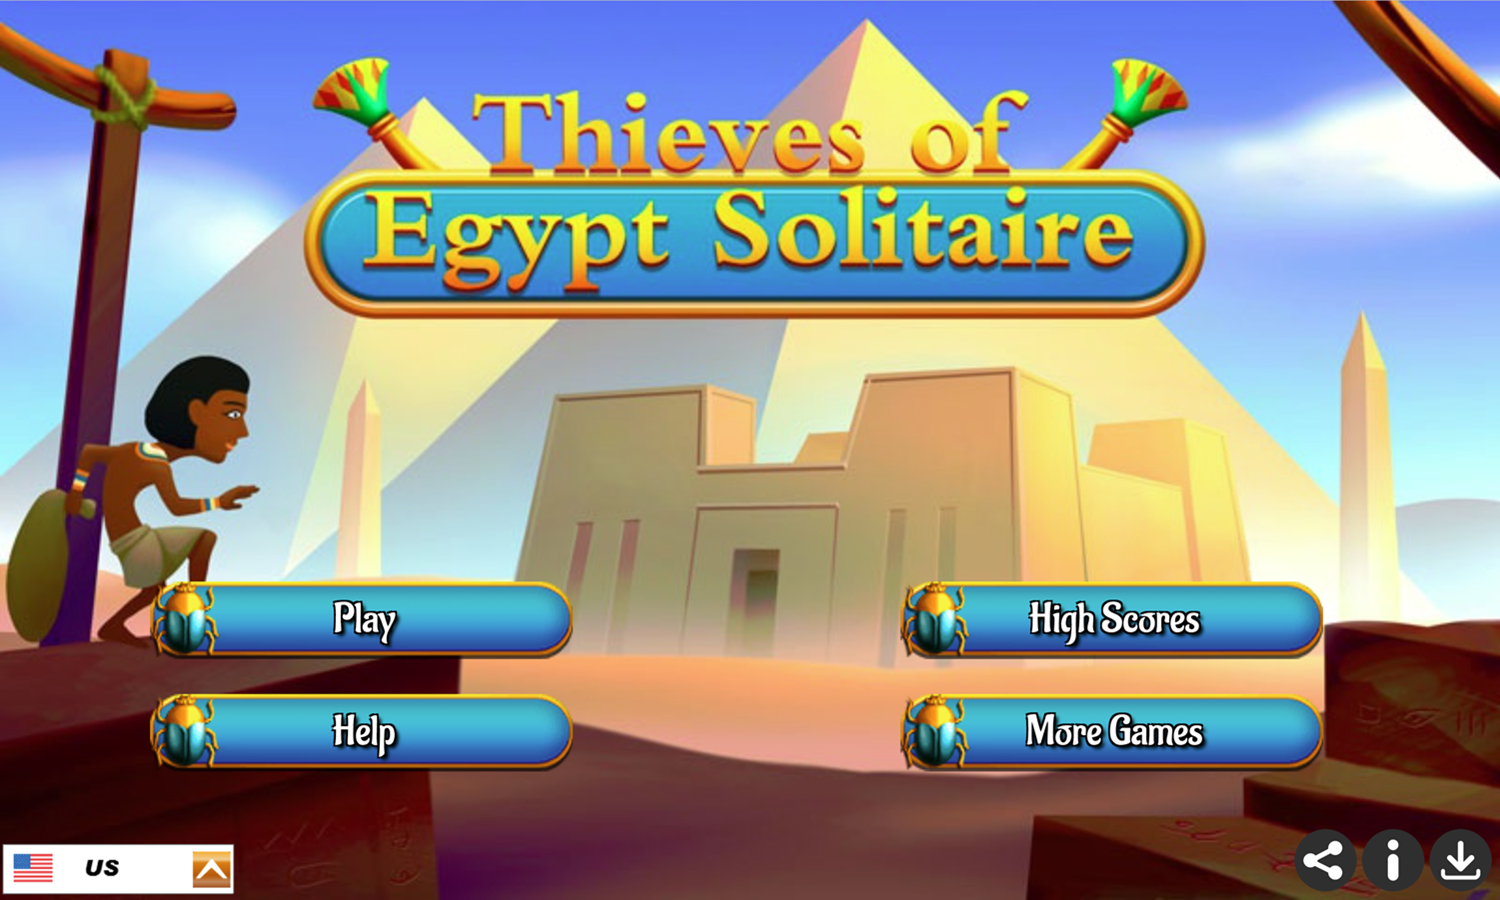 Thieves of Egypt Solitaire Game Welcome Screen Screenshot.